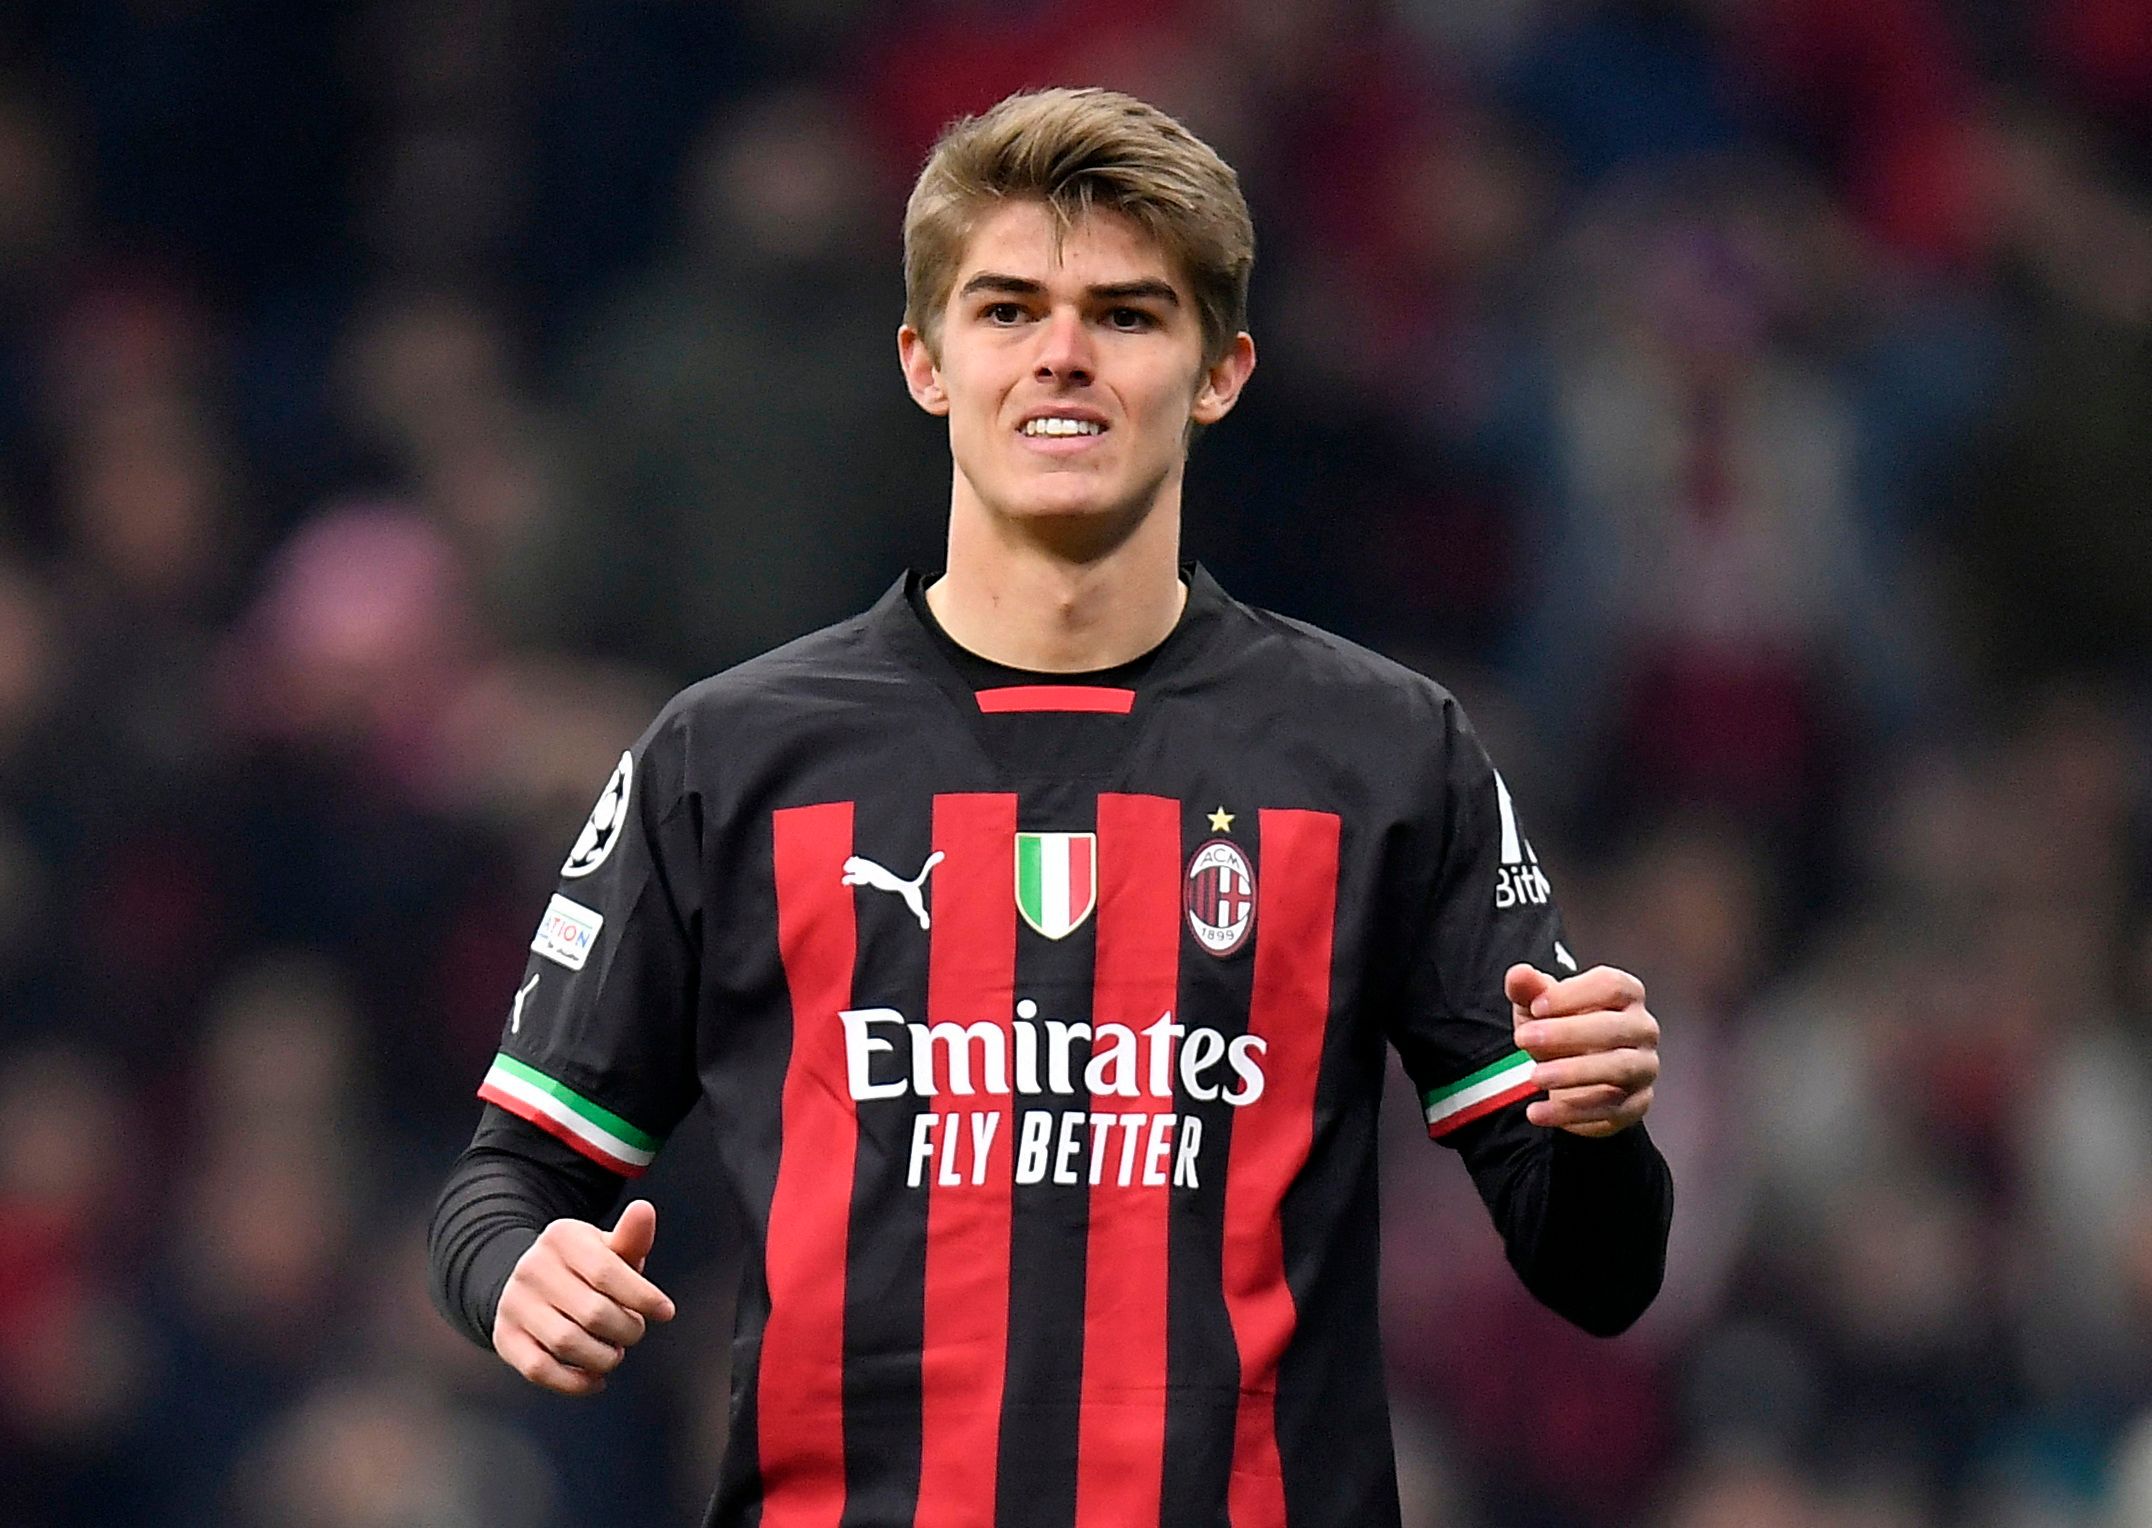 Soccer Football - Champions League - Round of 16 First Leg - AC Milan v Tottenham Hotspur - San Siro, Milan, Italy - February 14, 2023  AC Milan's Charles De Ketelaere reacts after missing a chance to score REUTERS/Daniele Mascolo